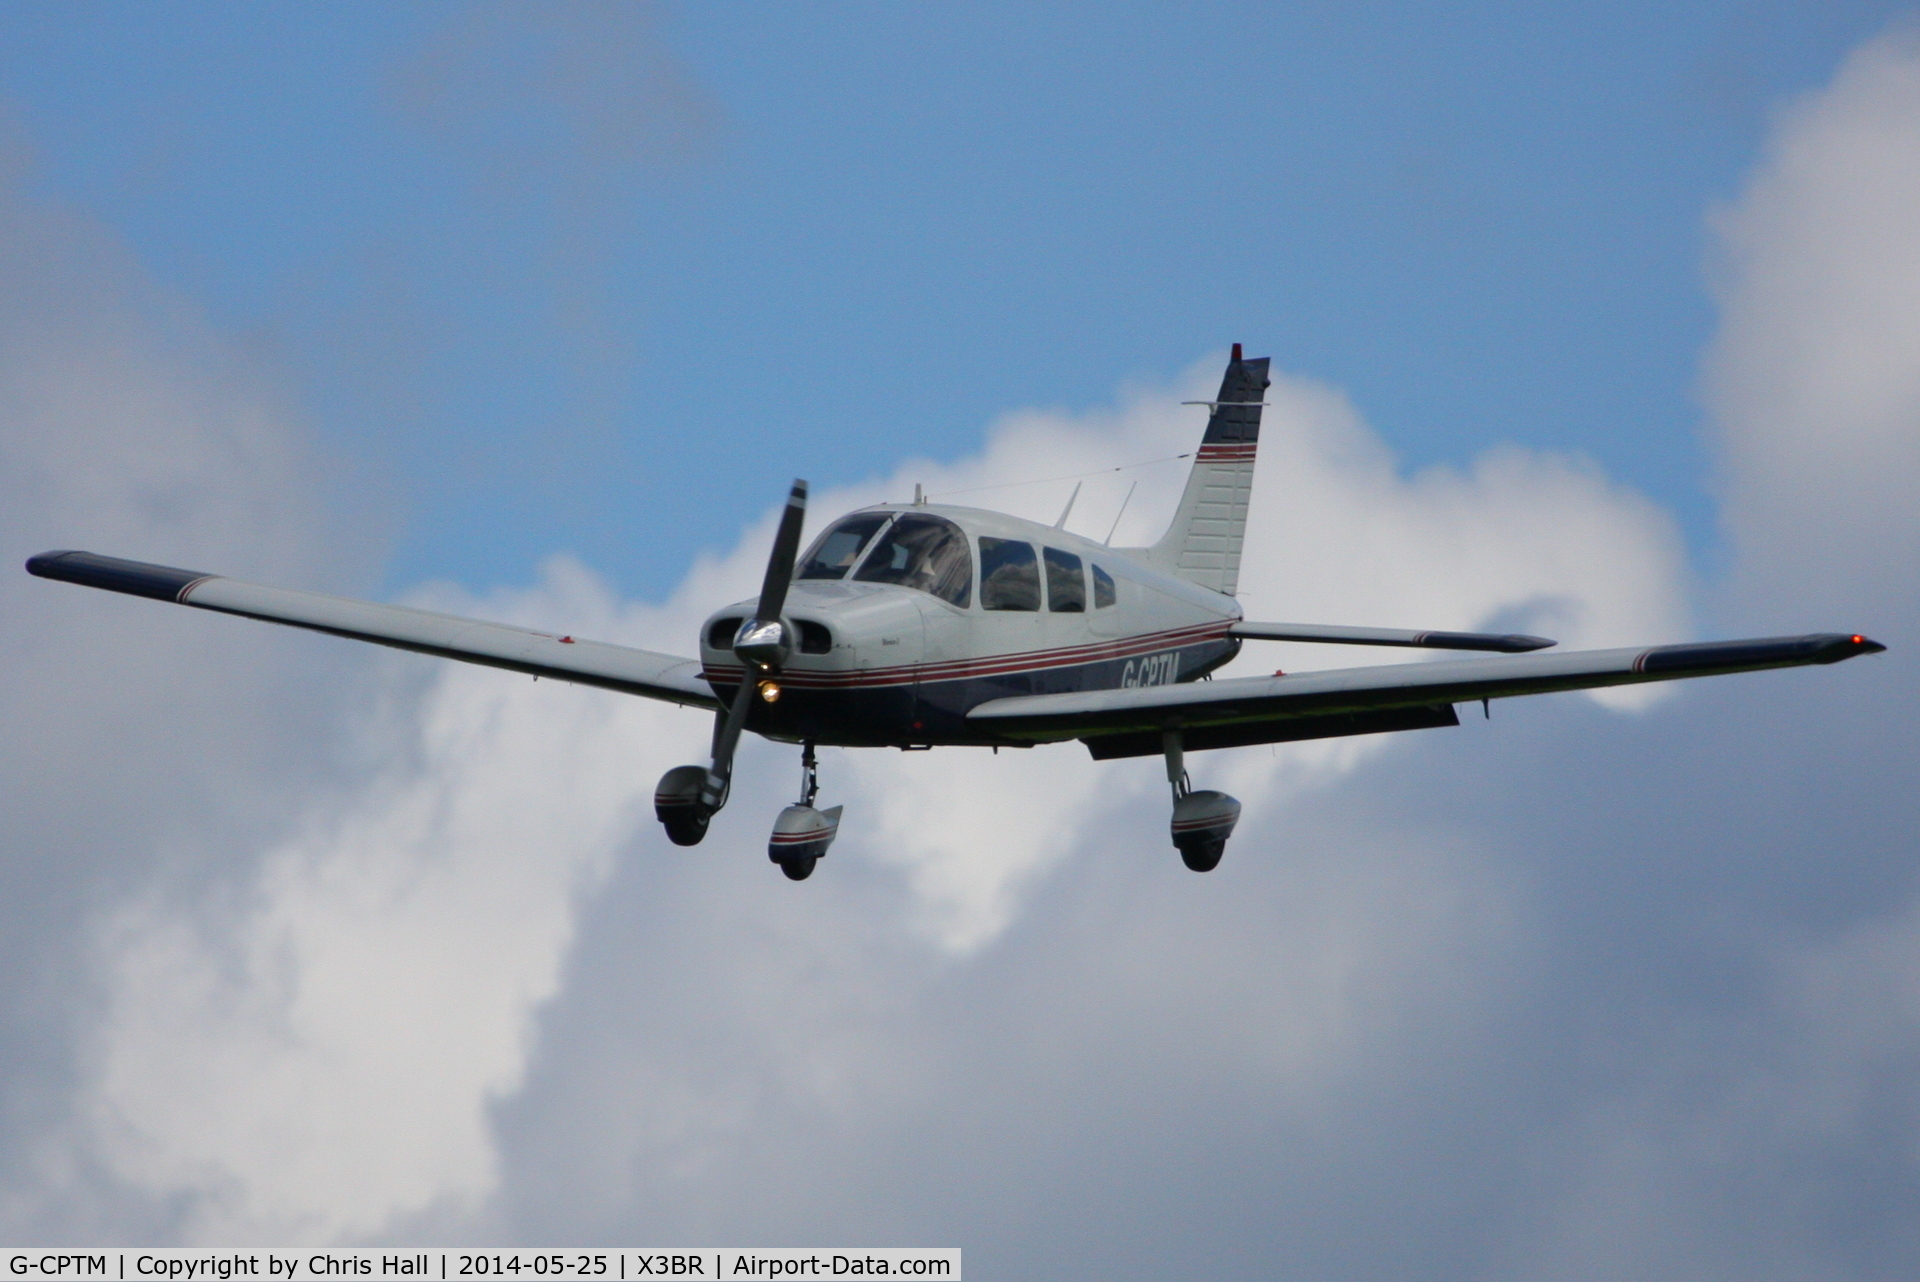 G-CPTM, 1977 Piper PA-28-151 Cherokee Warrior C/N 28-7715012, visitor at the Cold War Jets Open Day 2014